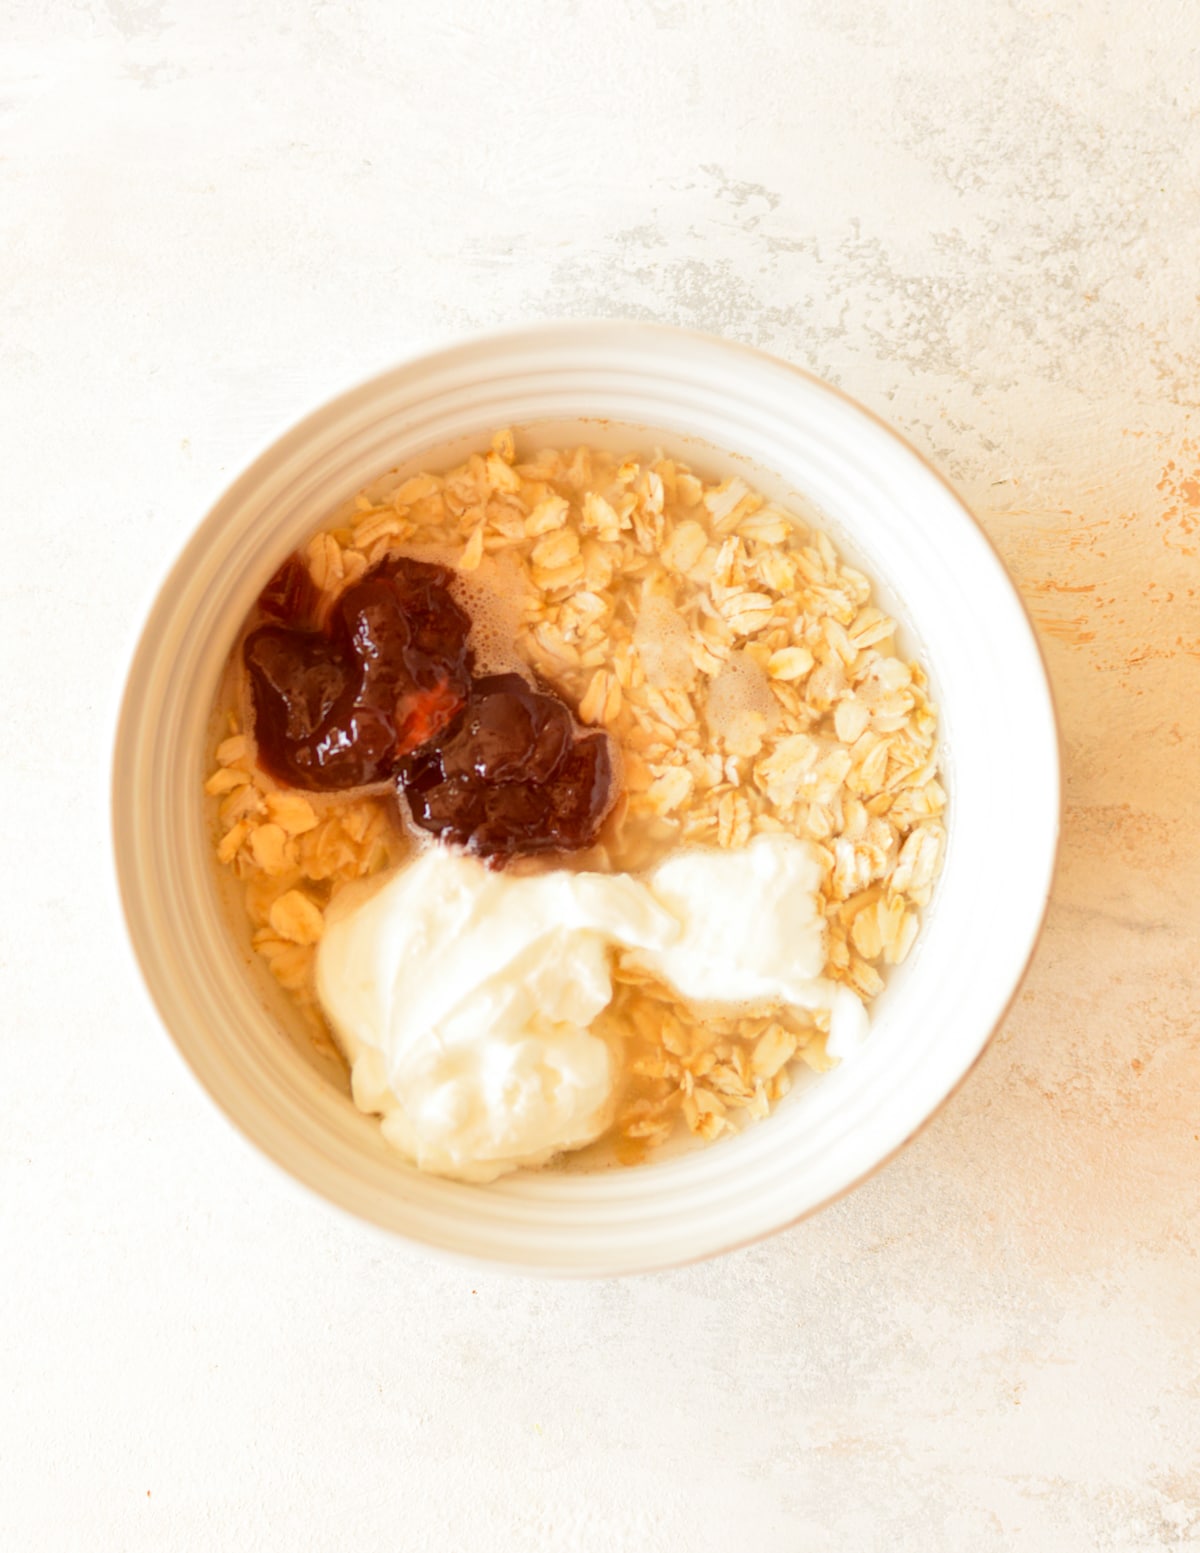 a bowl of oats with water, yogurt, jam, and maple syrup